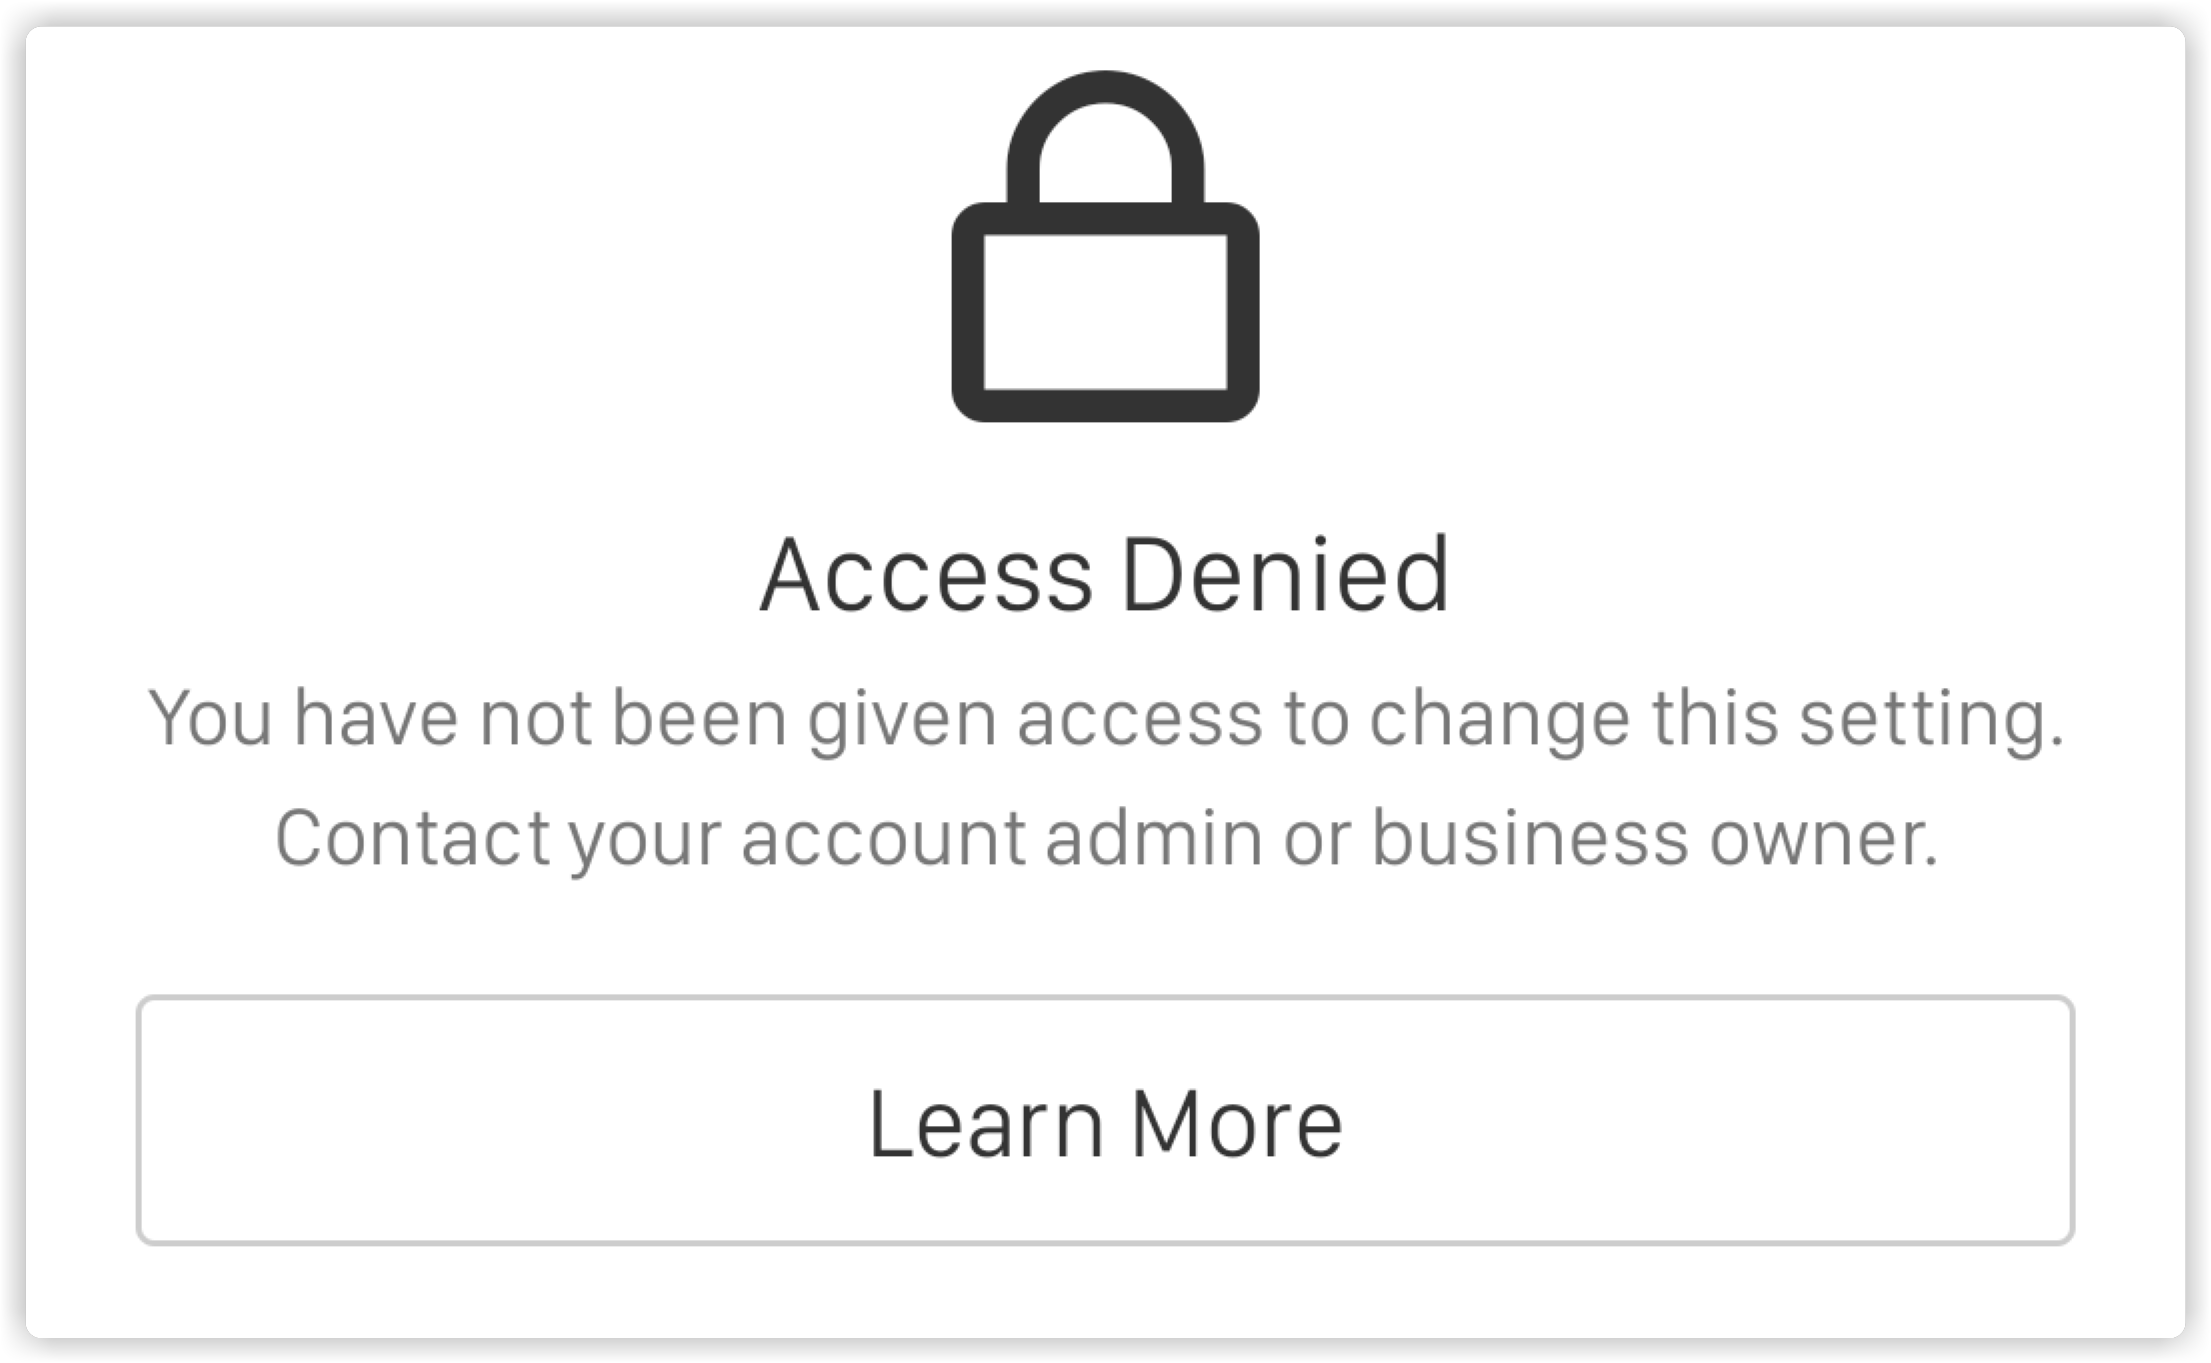 vpro_access_denied_2x.png